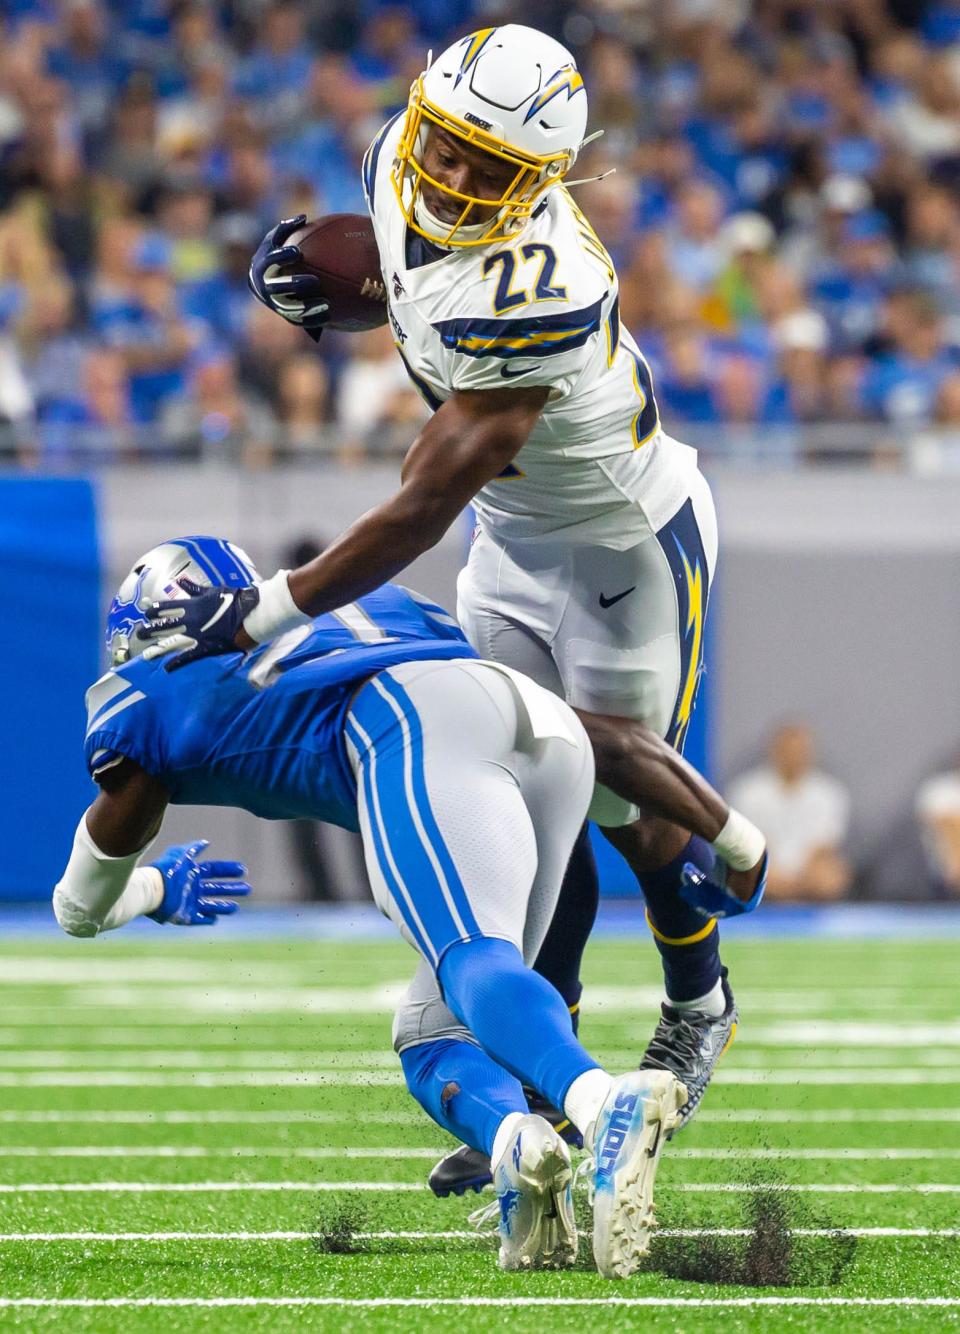 Chargers running back Justin Jackson falls forward for a first down against Lions safety Tracy Walker at Ford Field, Sunday, Sept. 15, 2019. The Lions beat the Chargers, 13-10.